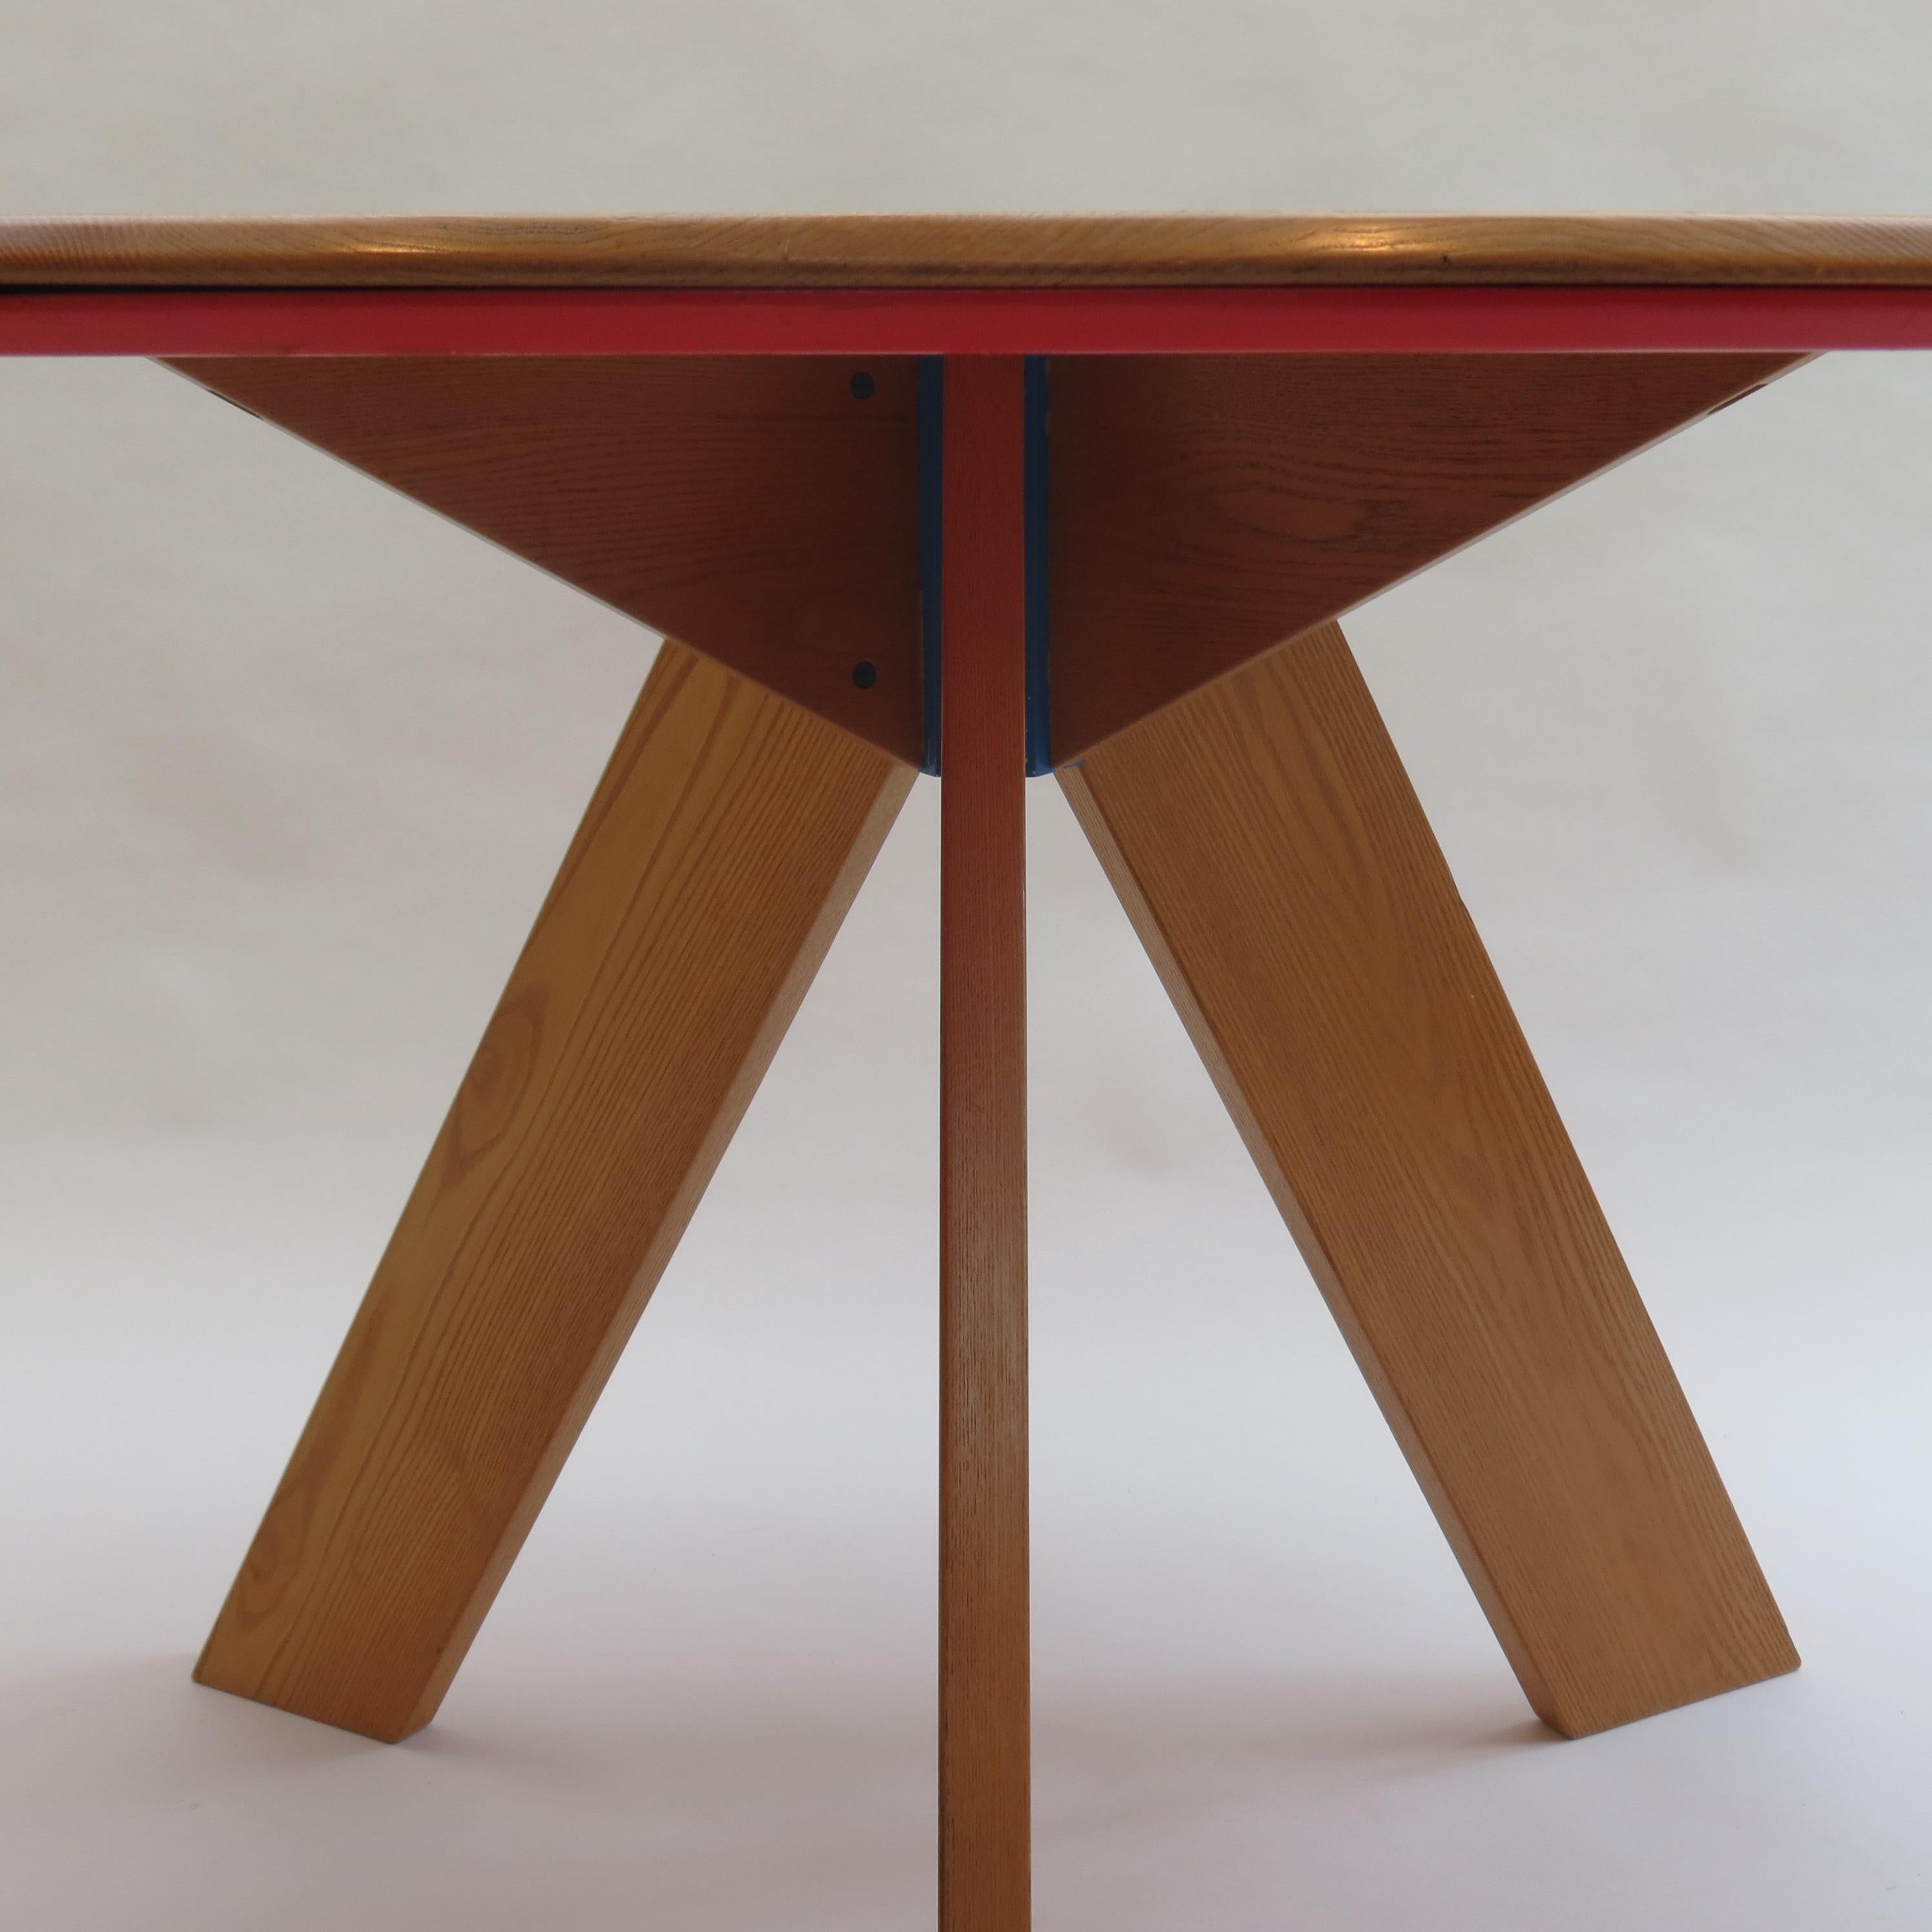 Midcentury Bespoke Round Dining Table by David Field 1980s with Red Blue Detail 2